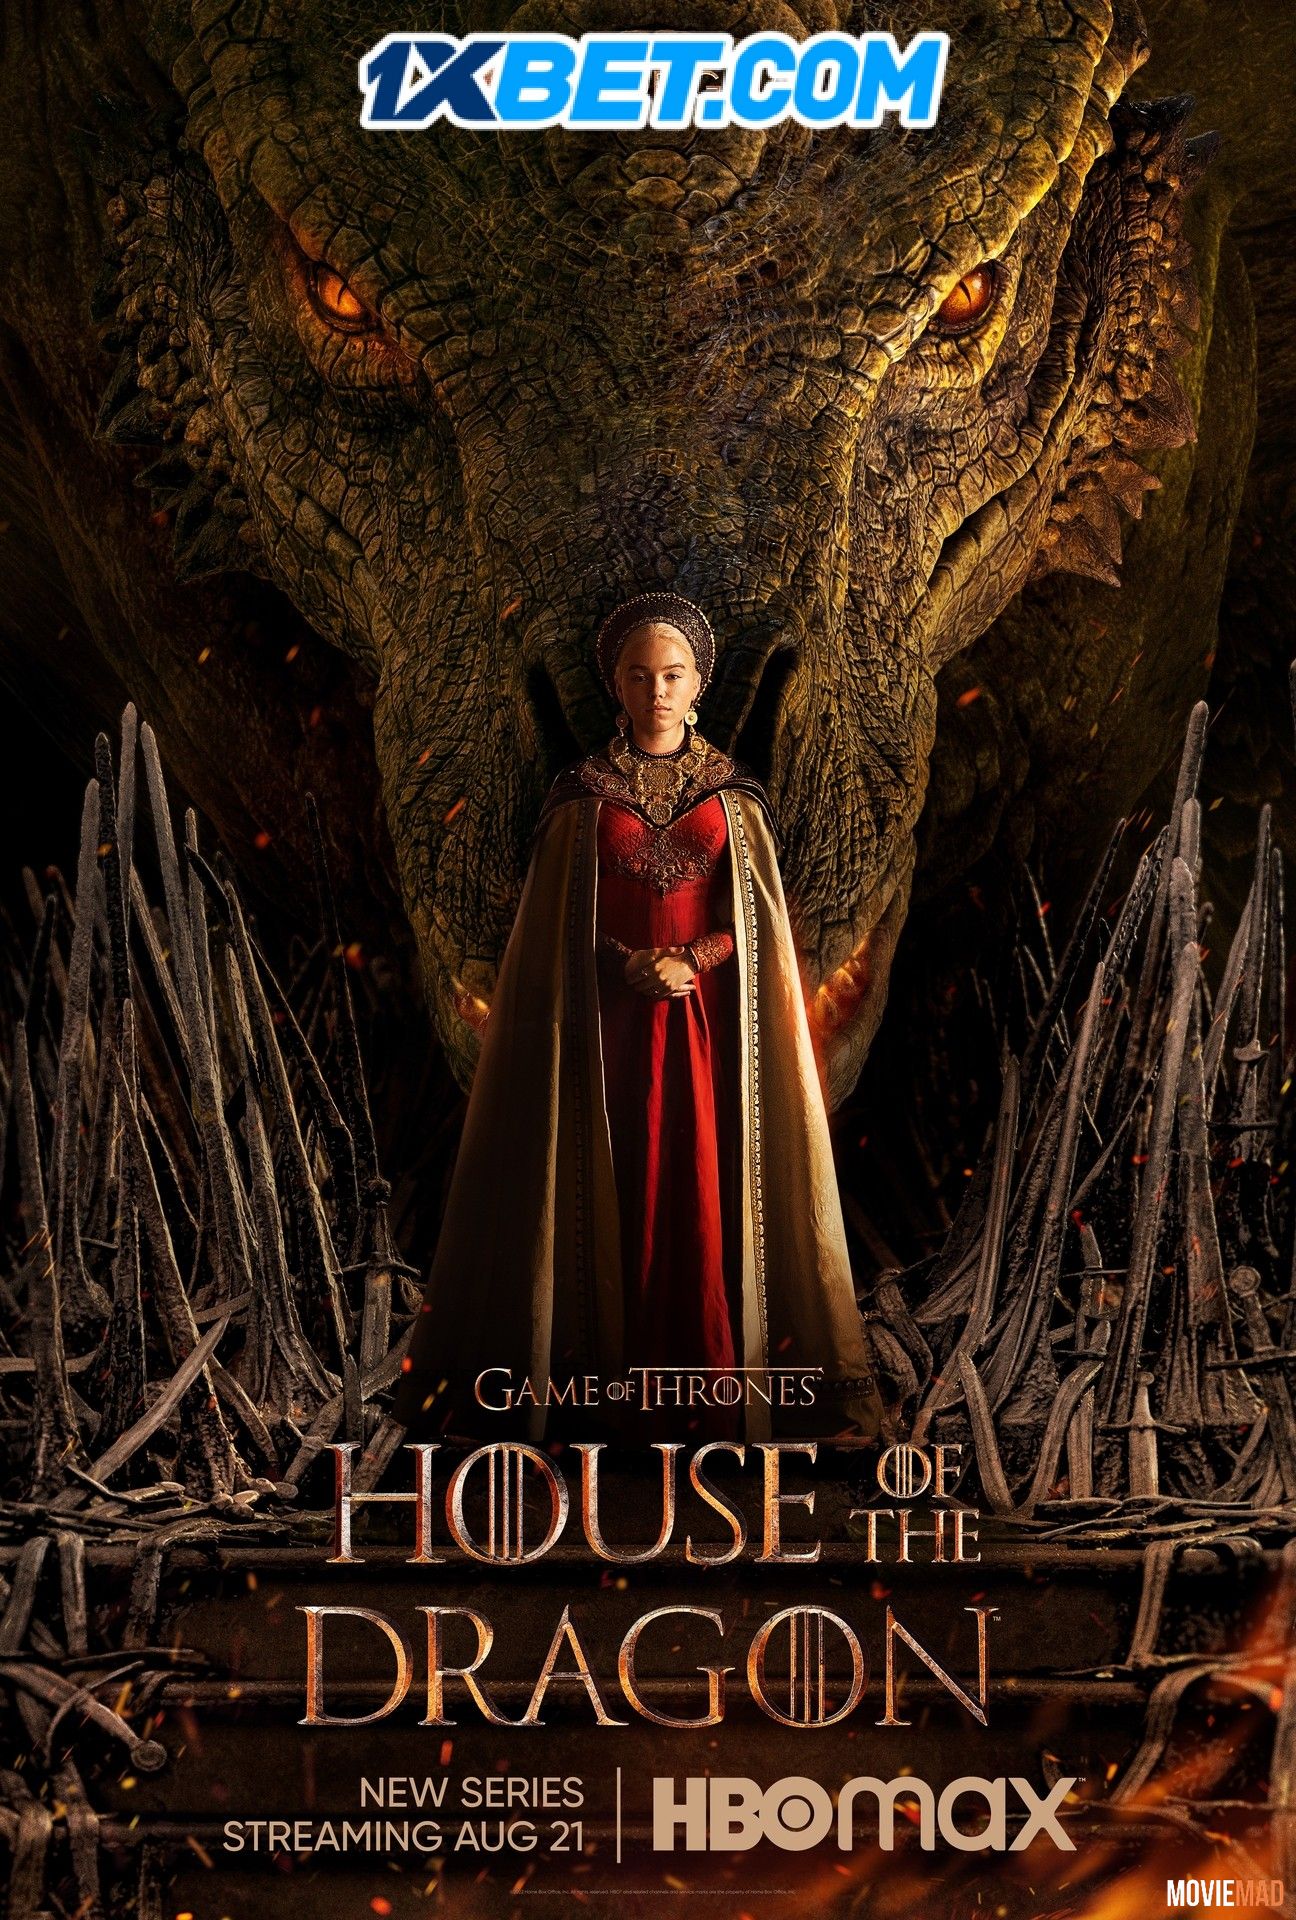 House Of The Dragon S01E02 (2022) Hindi (Voice Over) HBOMAX HDRip 1080p 720p 480p